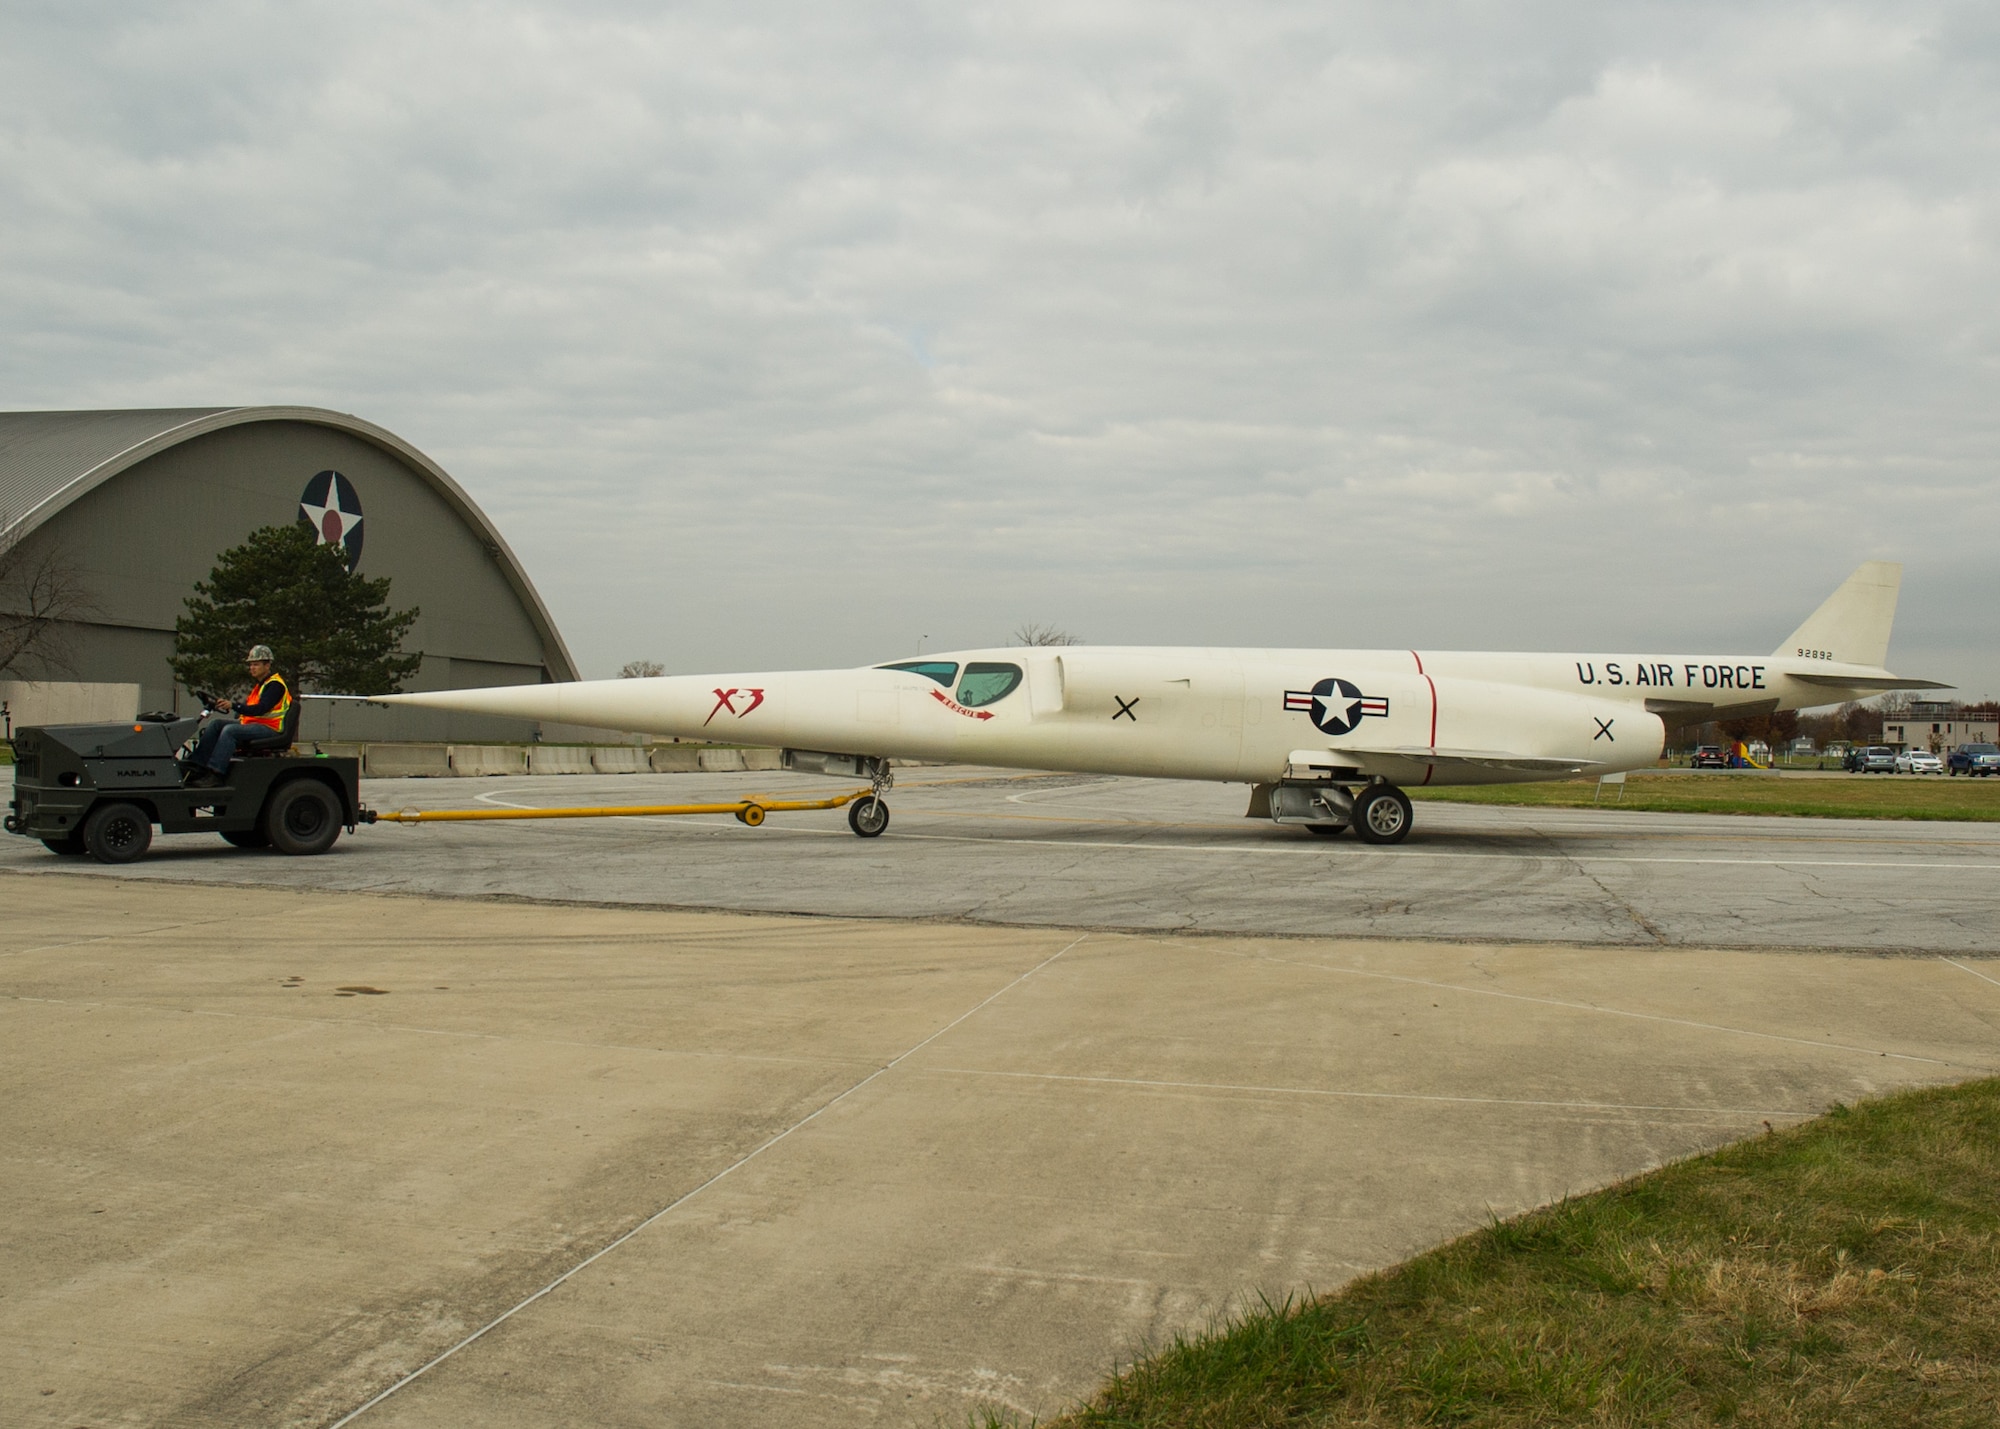 Restoration staff move the Douglas X-3 Stiletto into the new fourth building at the National Museum of the U.S. Air Force on Nov. 5, 2015. (U.S. Air Force photo by Ken LaRock)